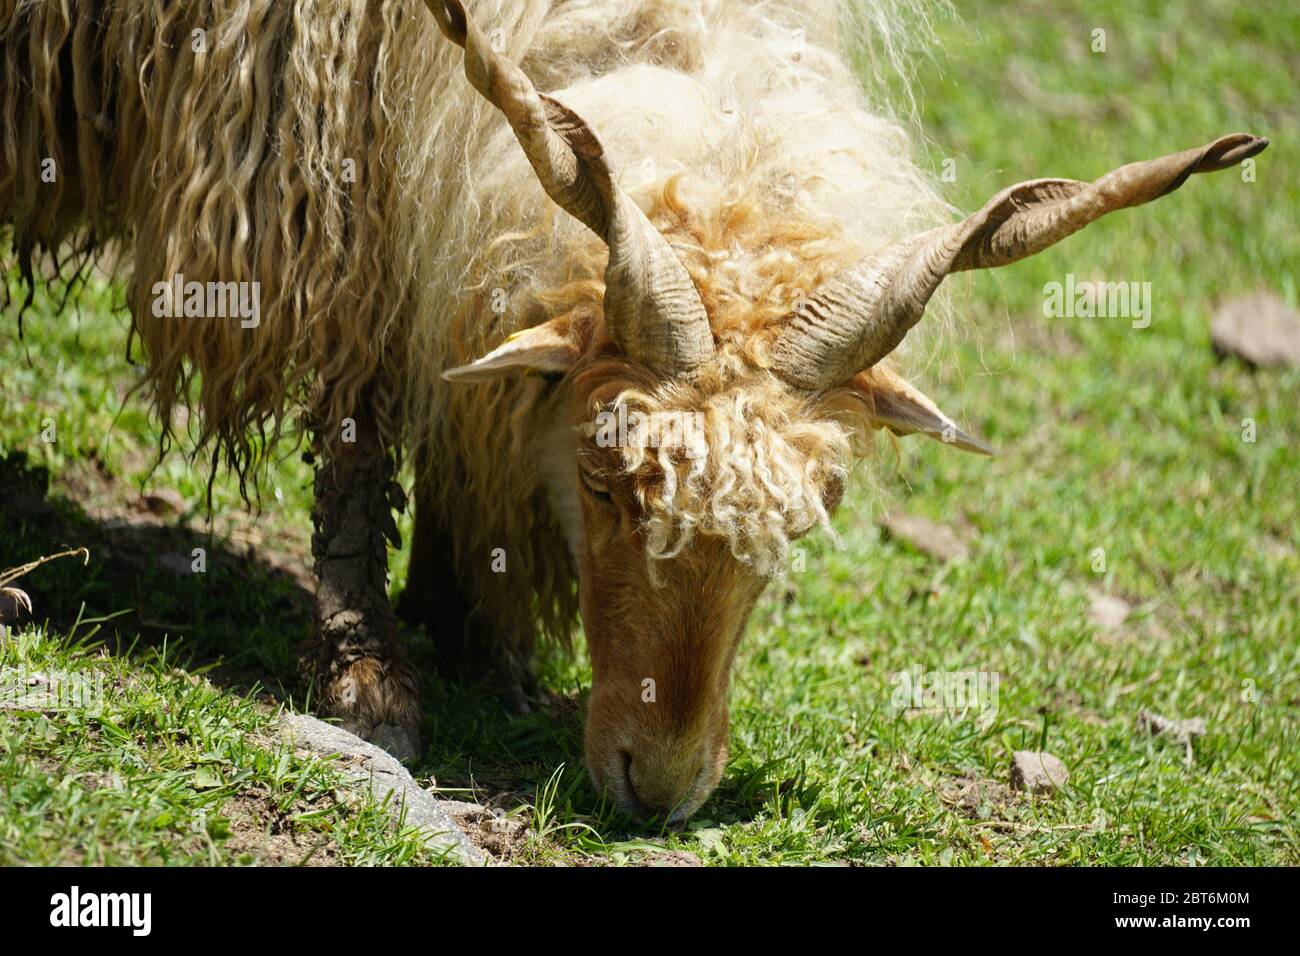 Racka sheep on a pasture head close-up photography. Stock Photo